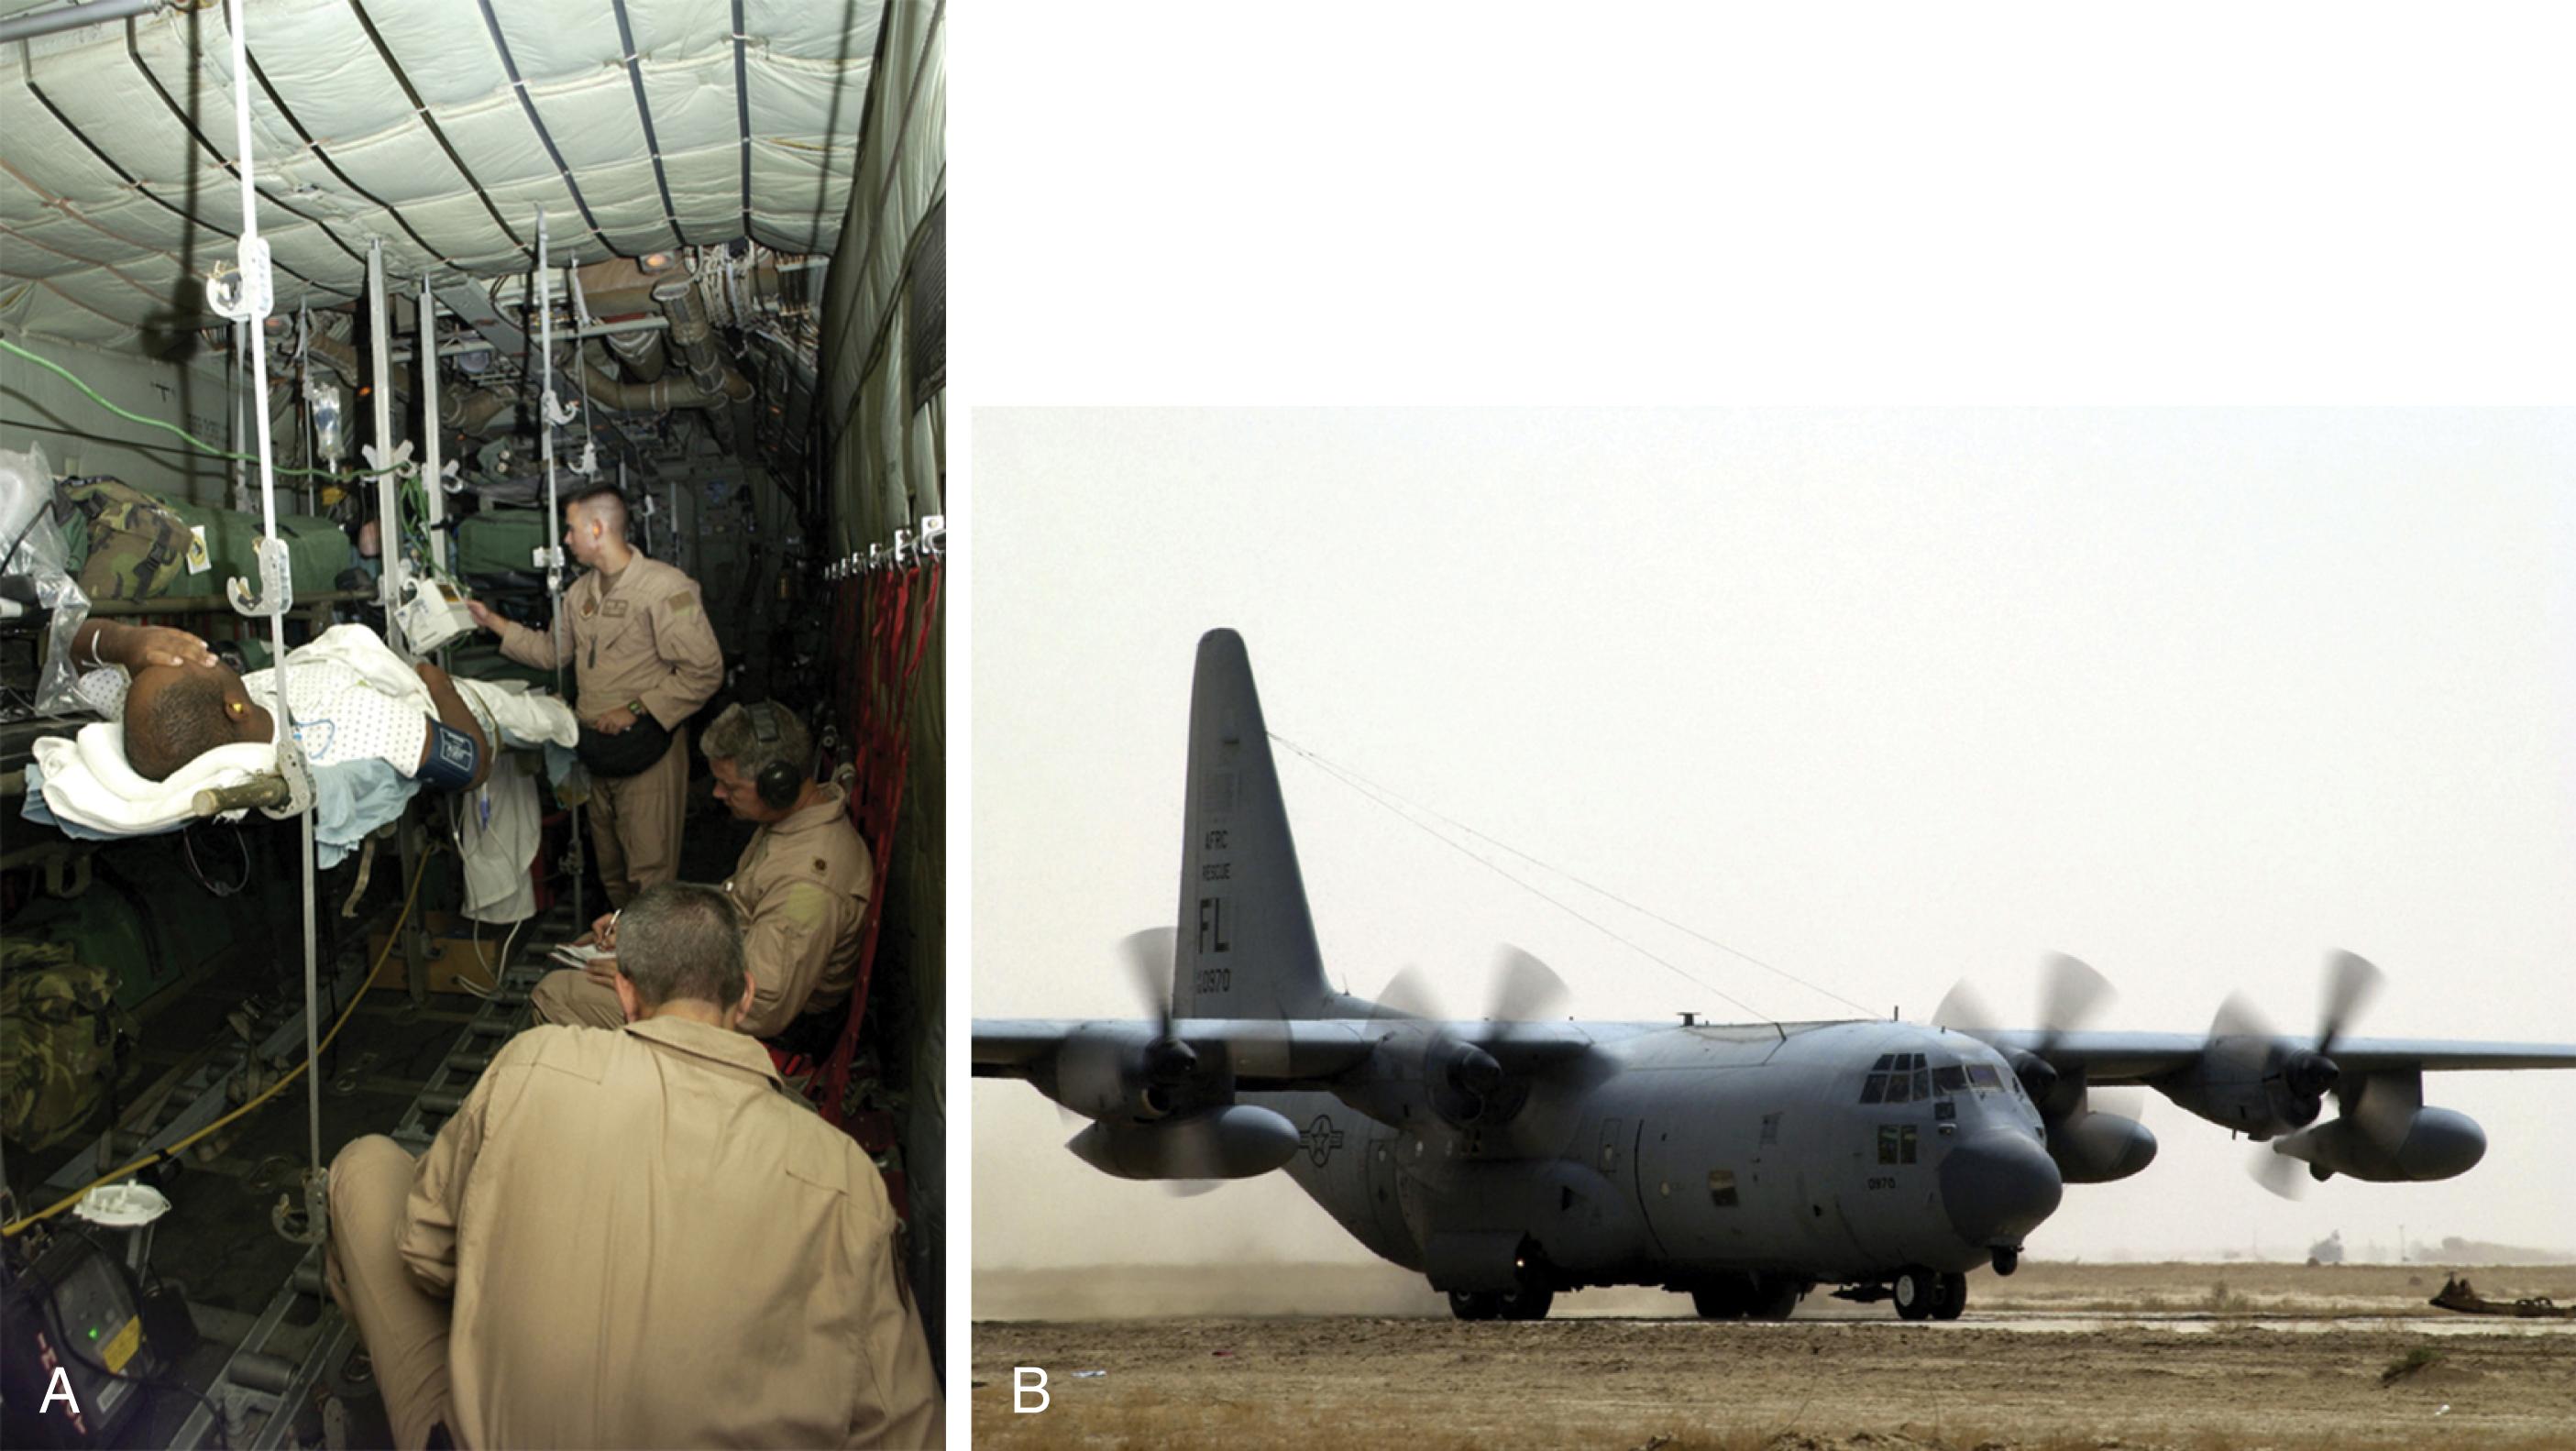 FIGURE 3, (A) Interior configuration of a Critical Care Air Transport Team onboard the (B) C-130 Hercules cargo aircraft